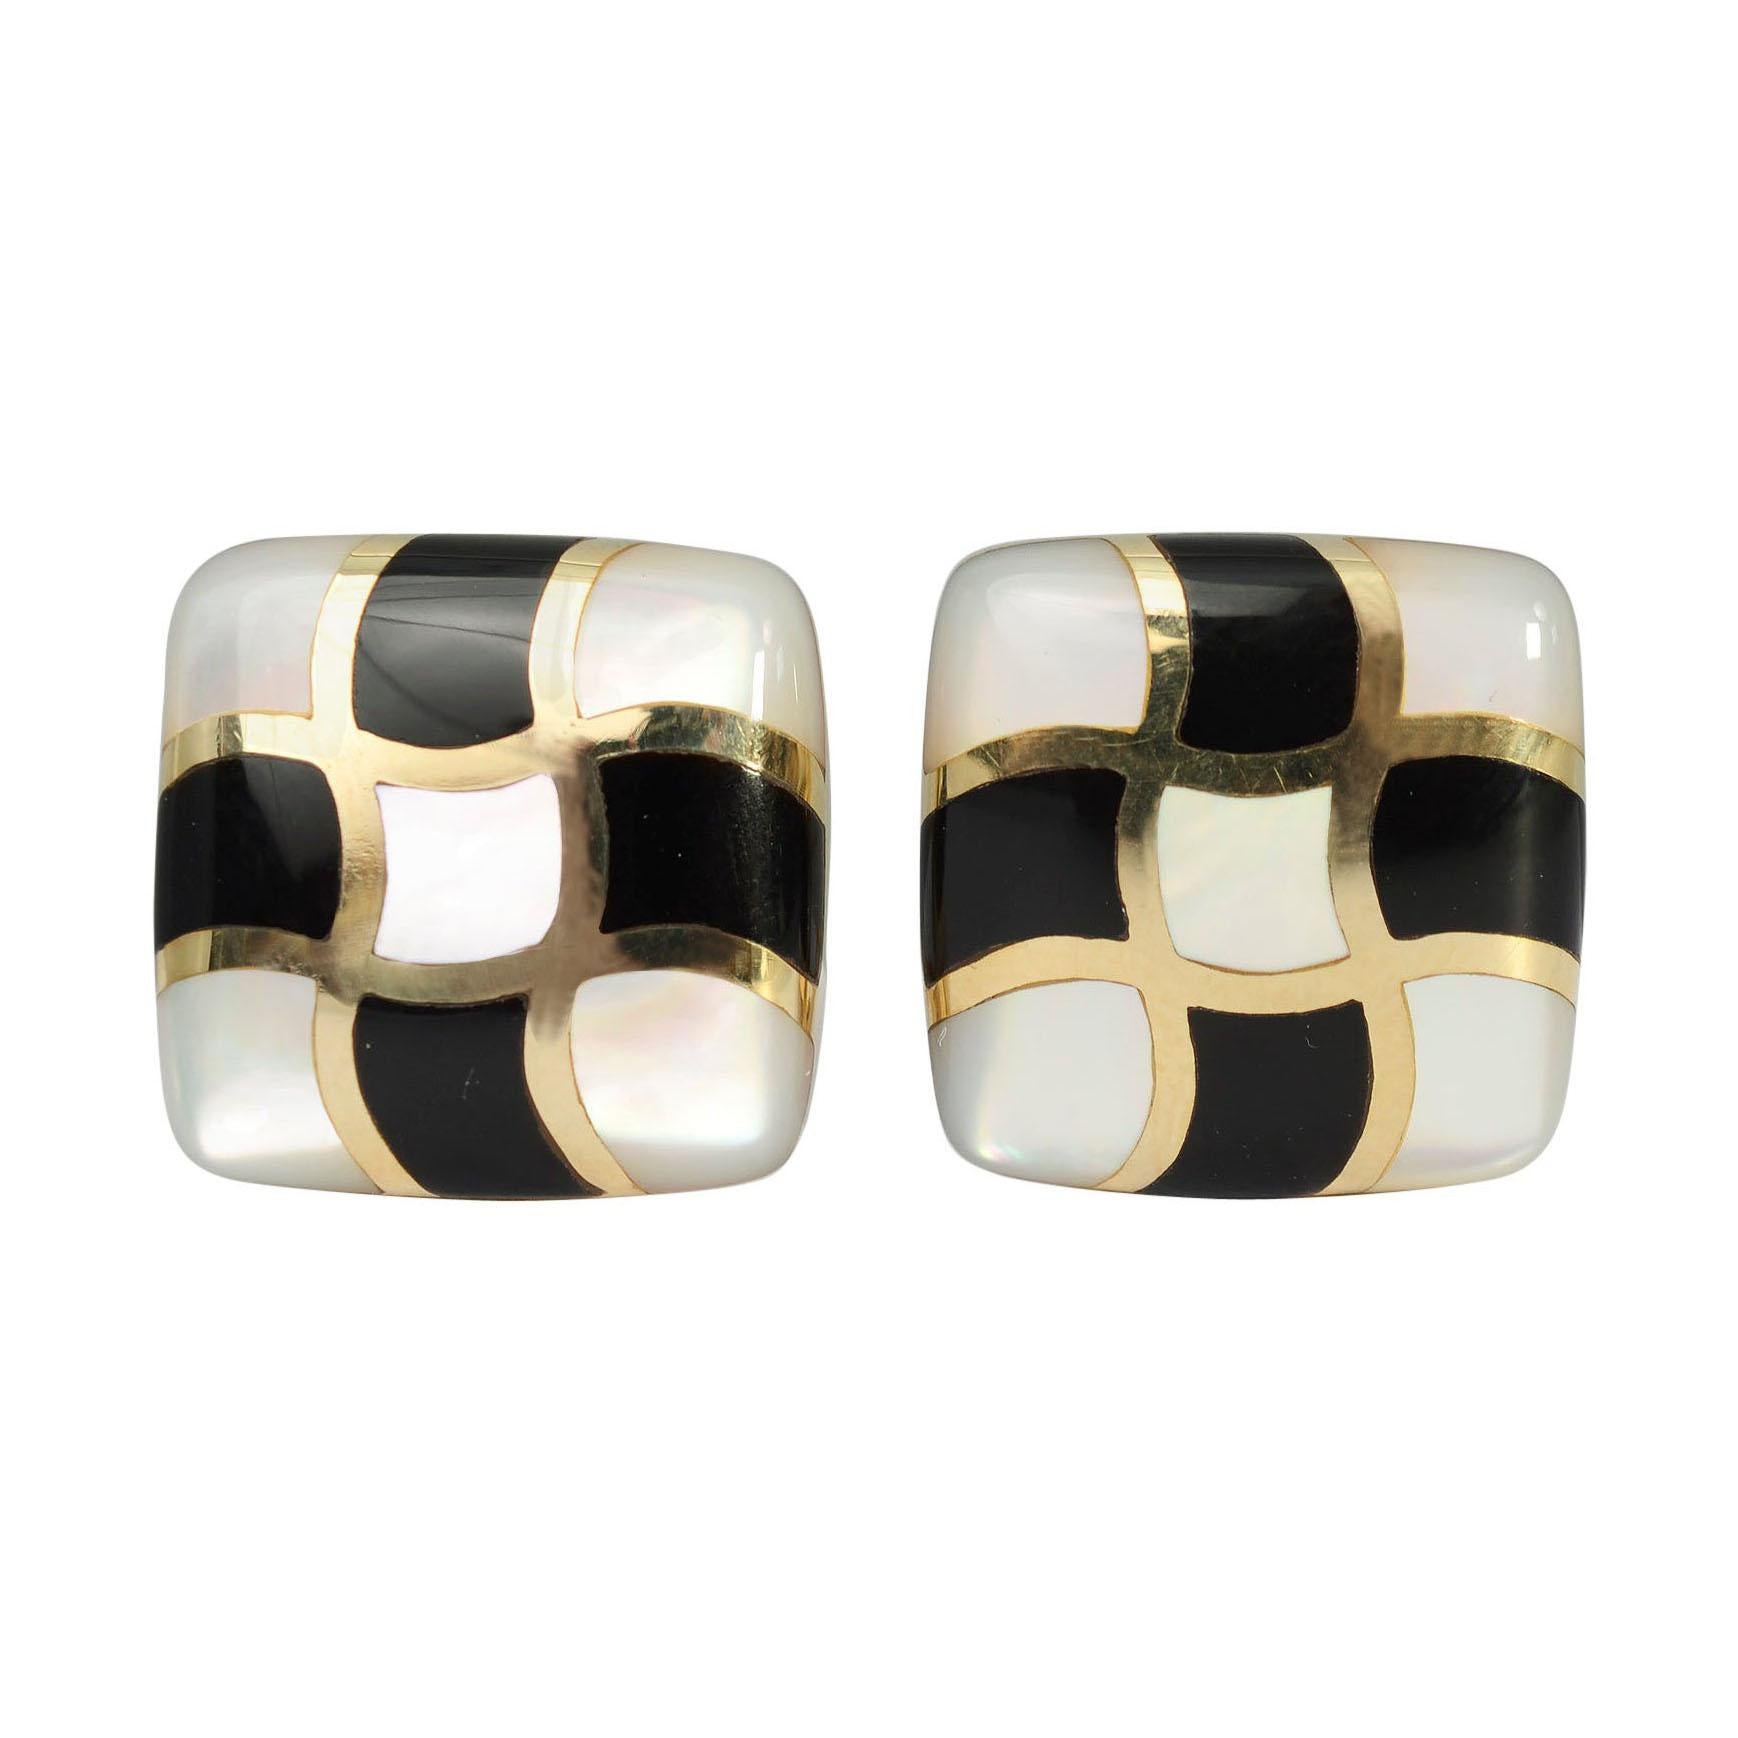 Asch Grossbardt Onyx and Mother of Pearl Earrings